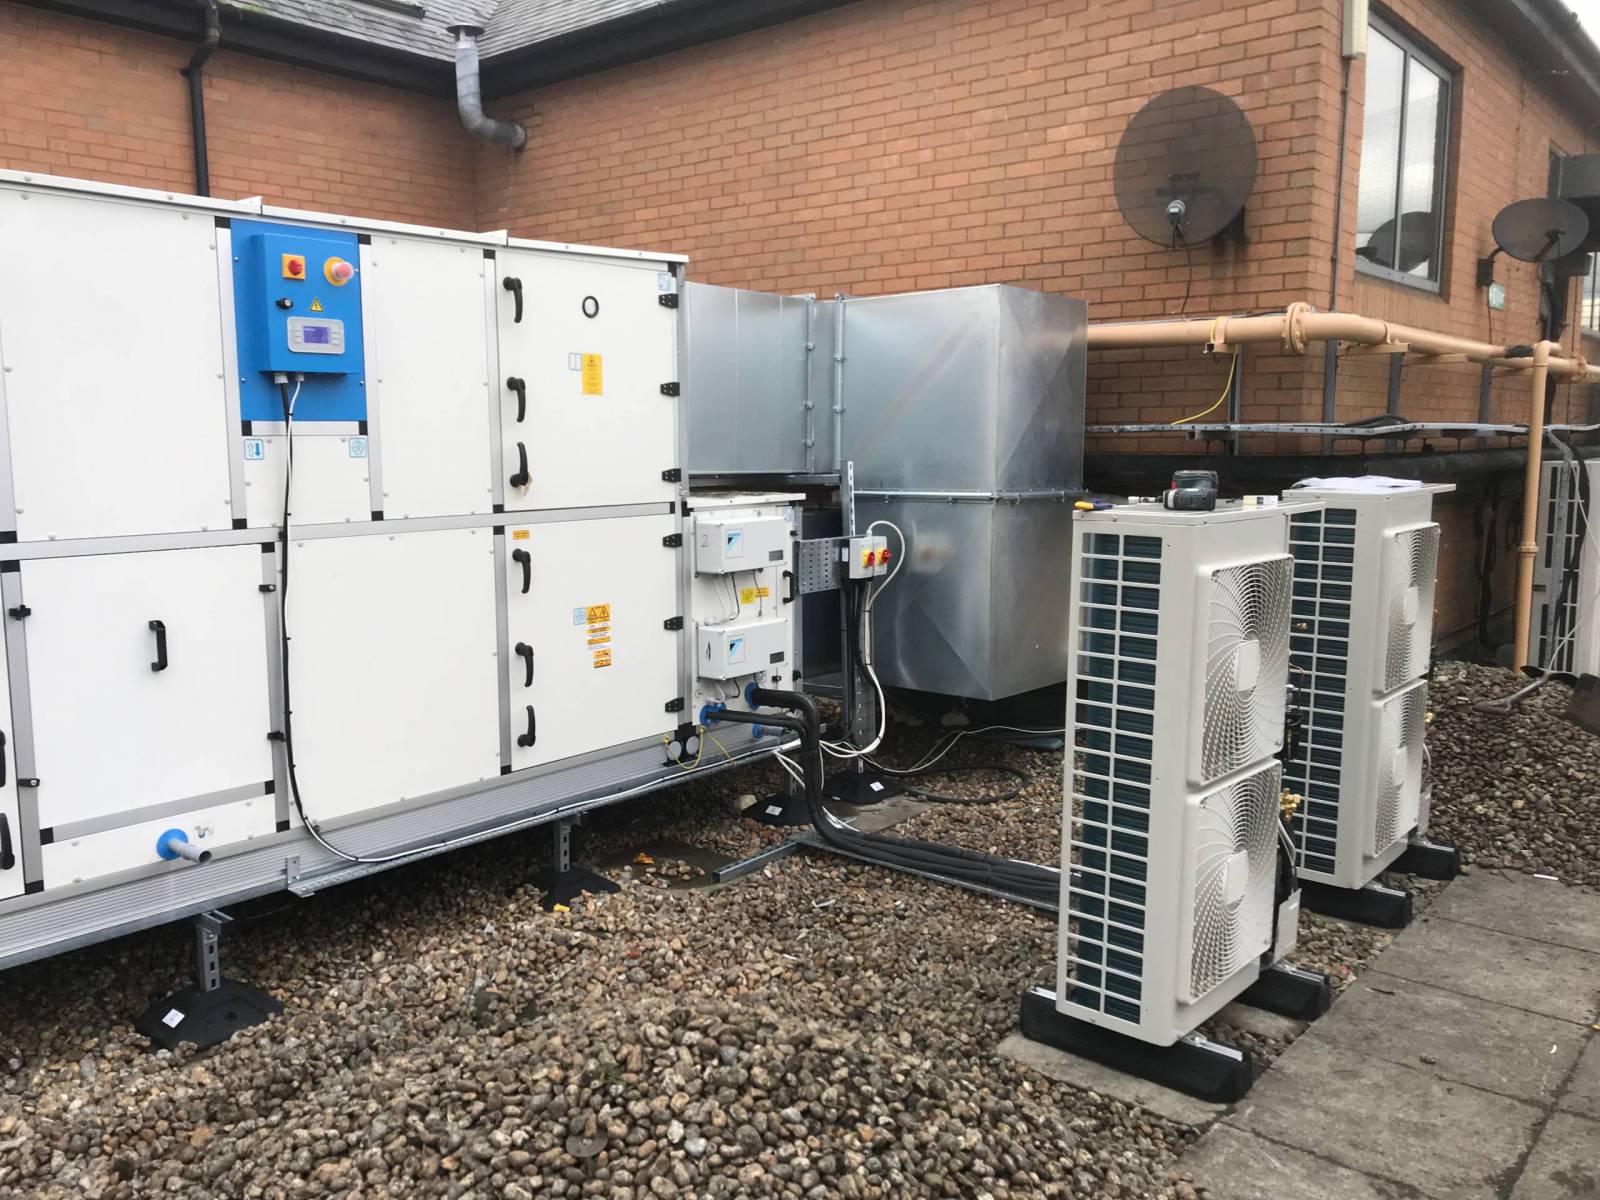 air-conditioning-service-london-commercial-air-conditioning-london